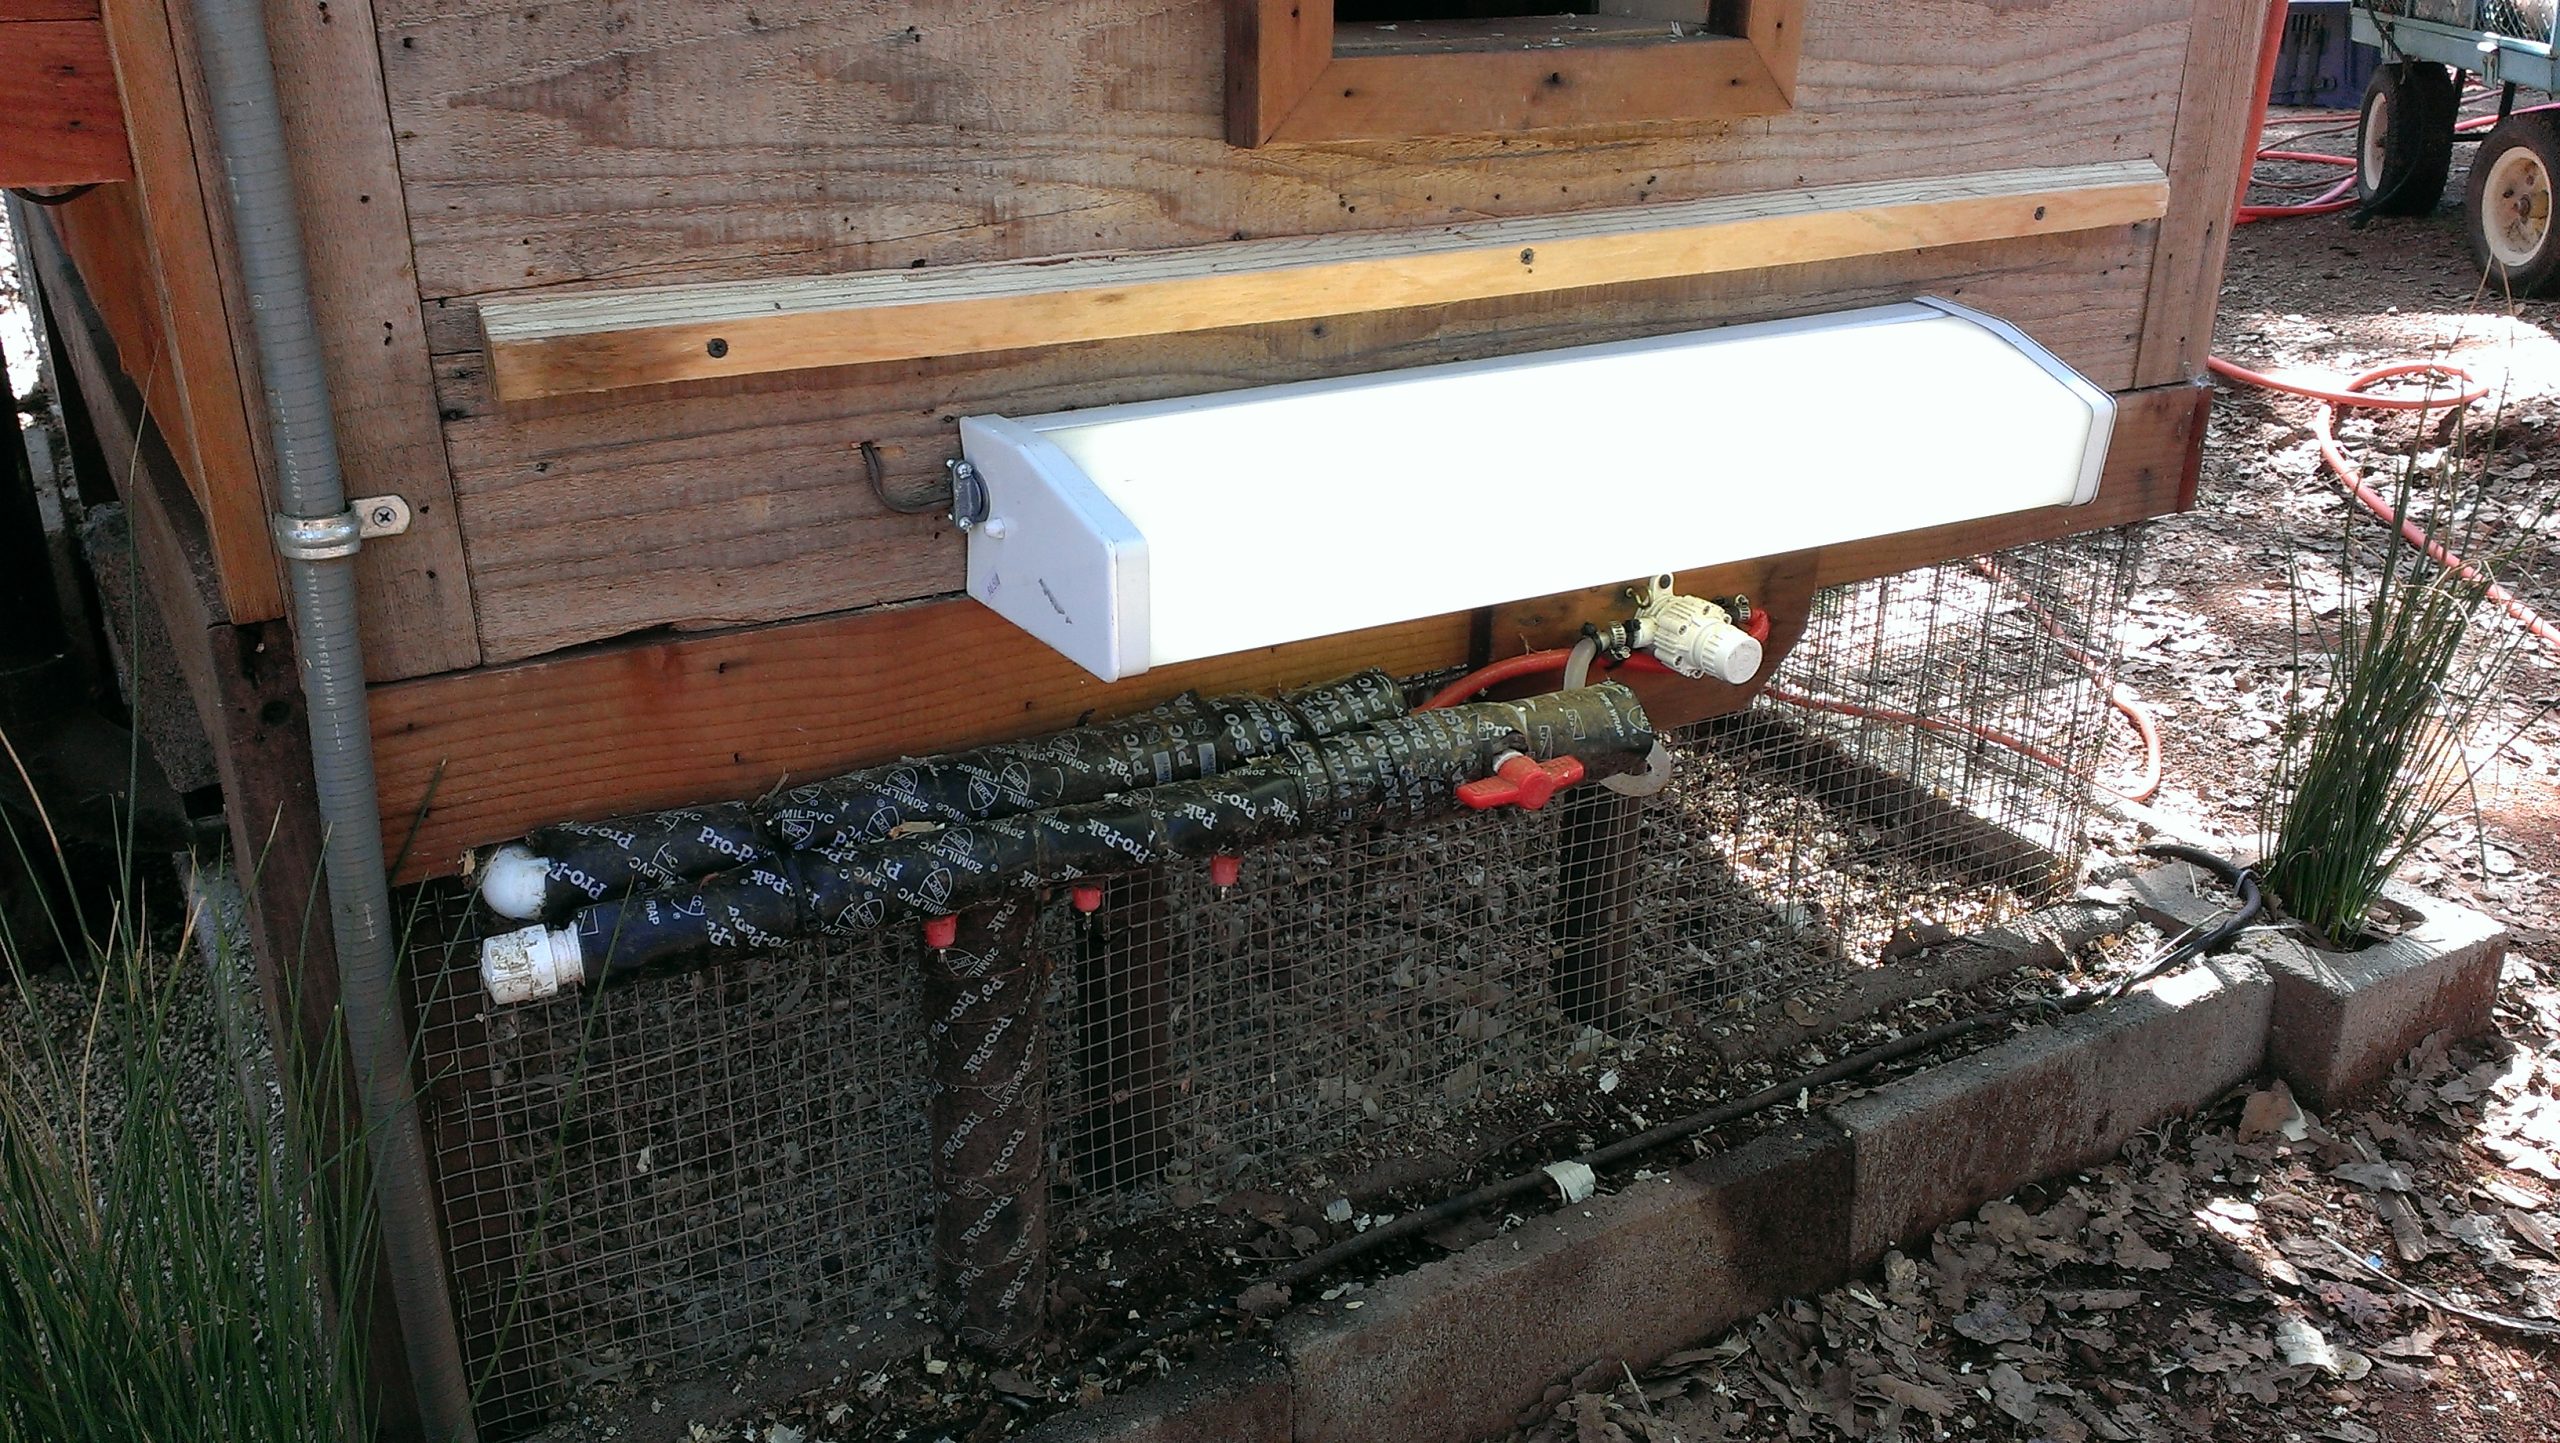 Chicken Coop Heater - Exterior Pipe Protection (mounted under stairs and above wrapped pipe)